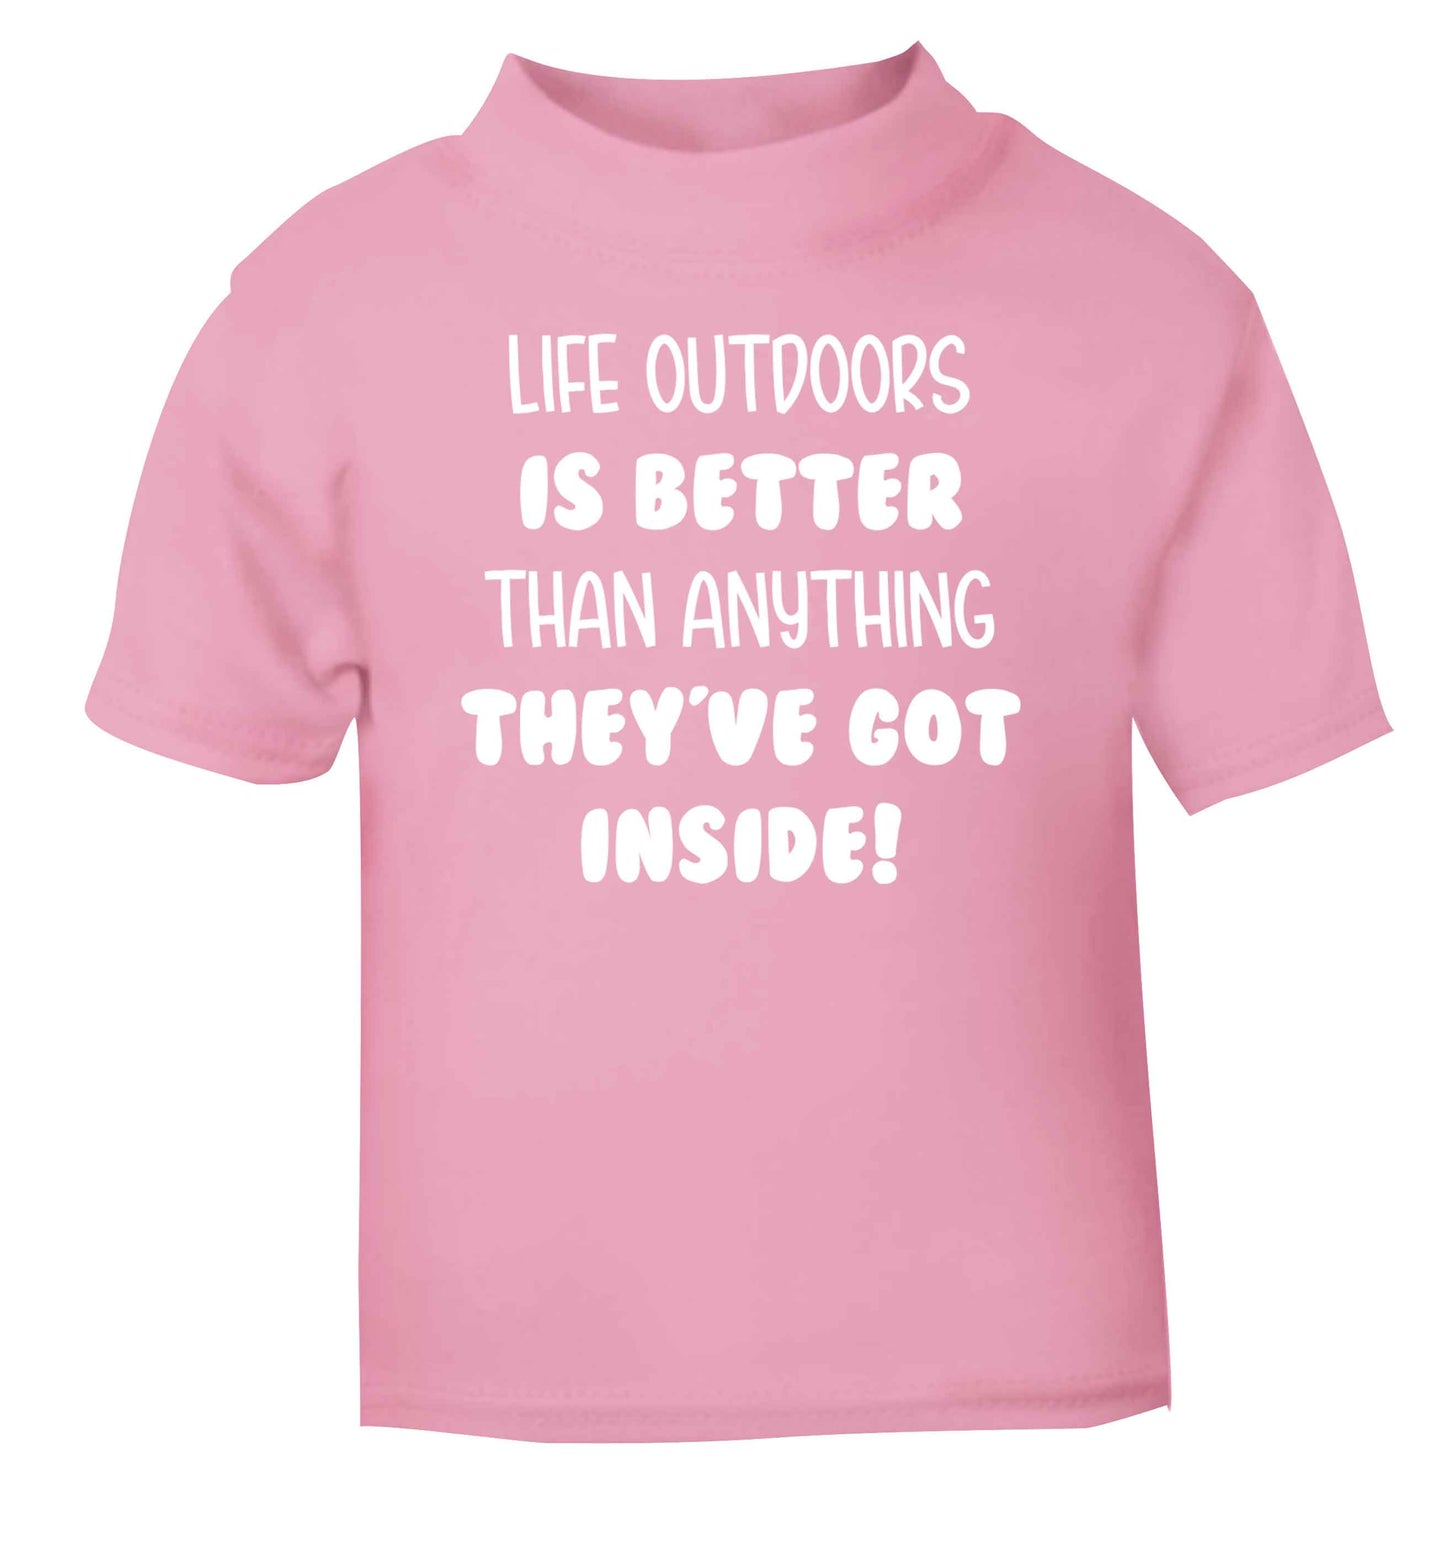 Life outdoors is better than anything they've go inside light pink Baby Toddler Tshirt 2 Years